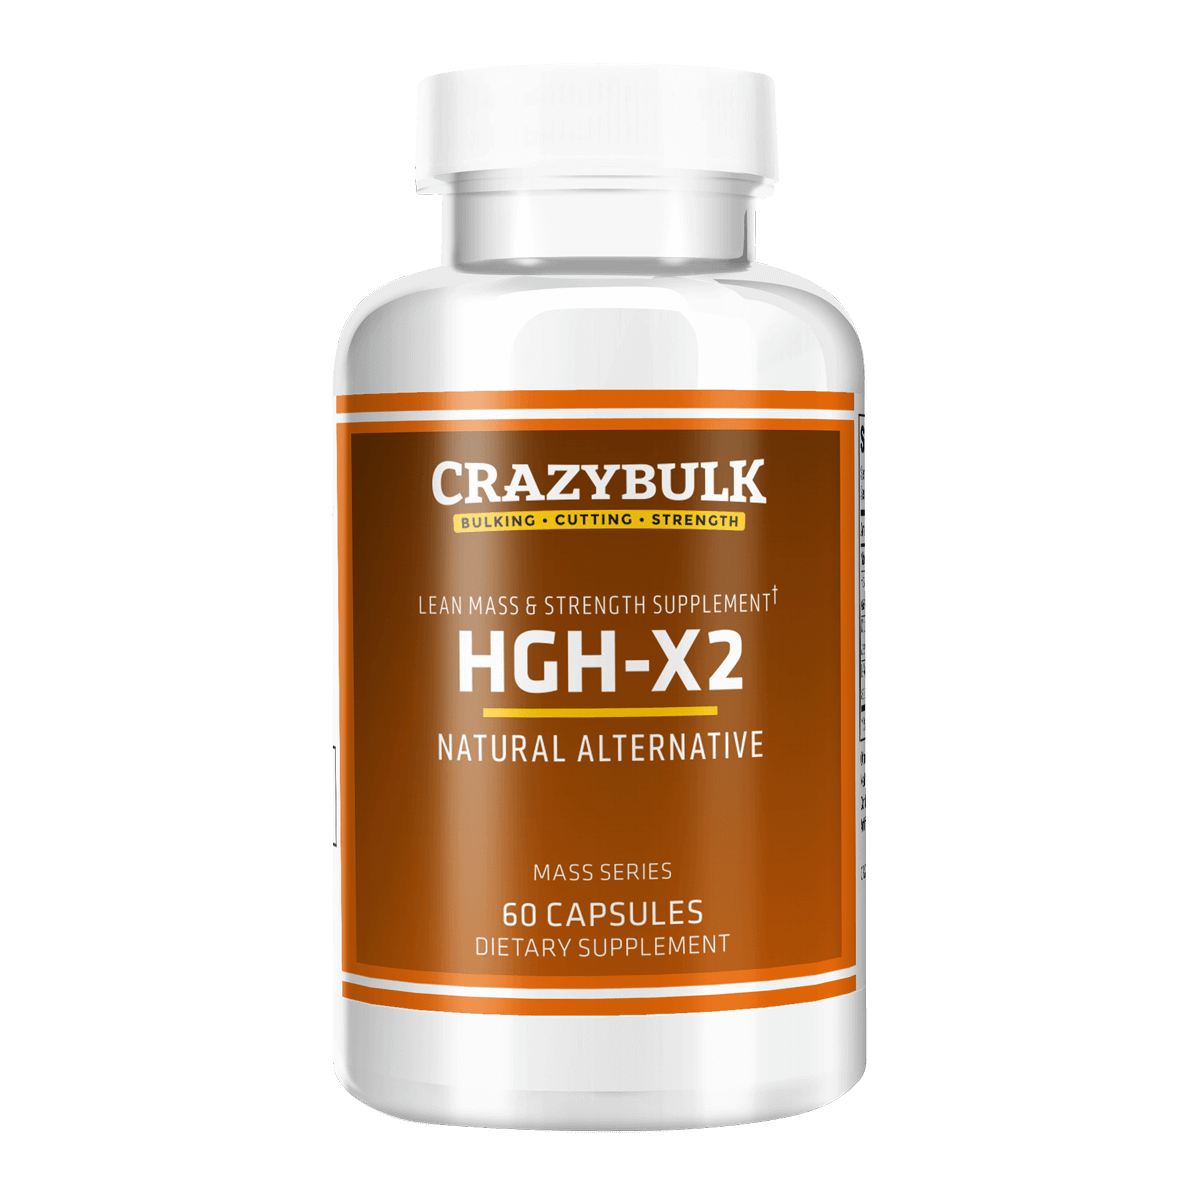 HGH-X2 review